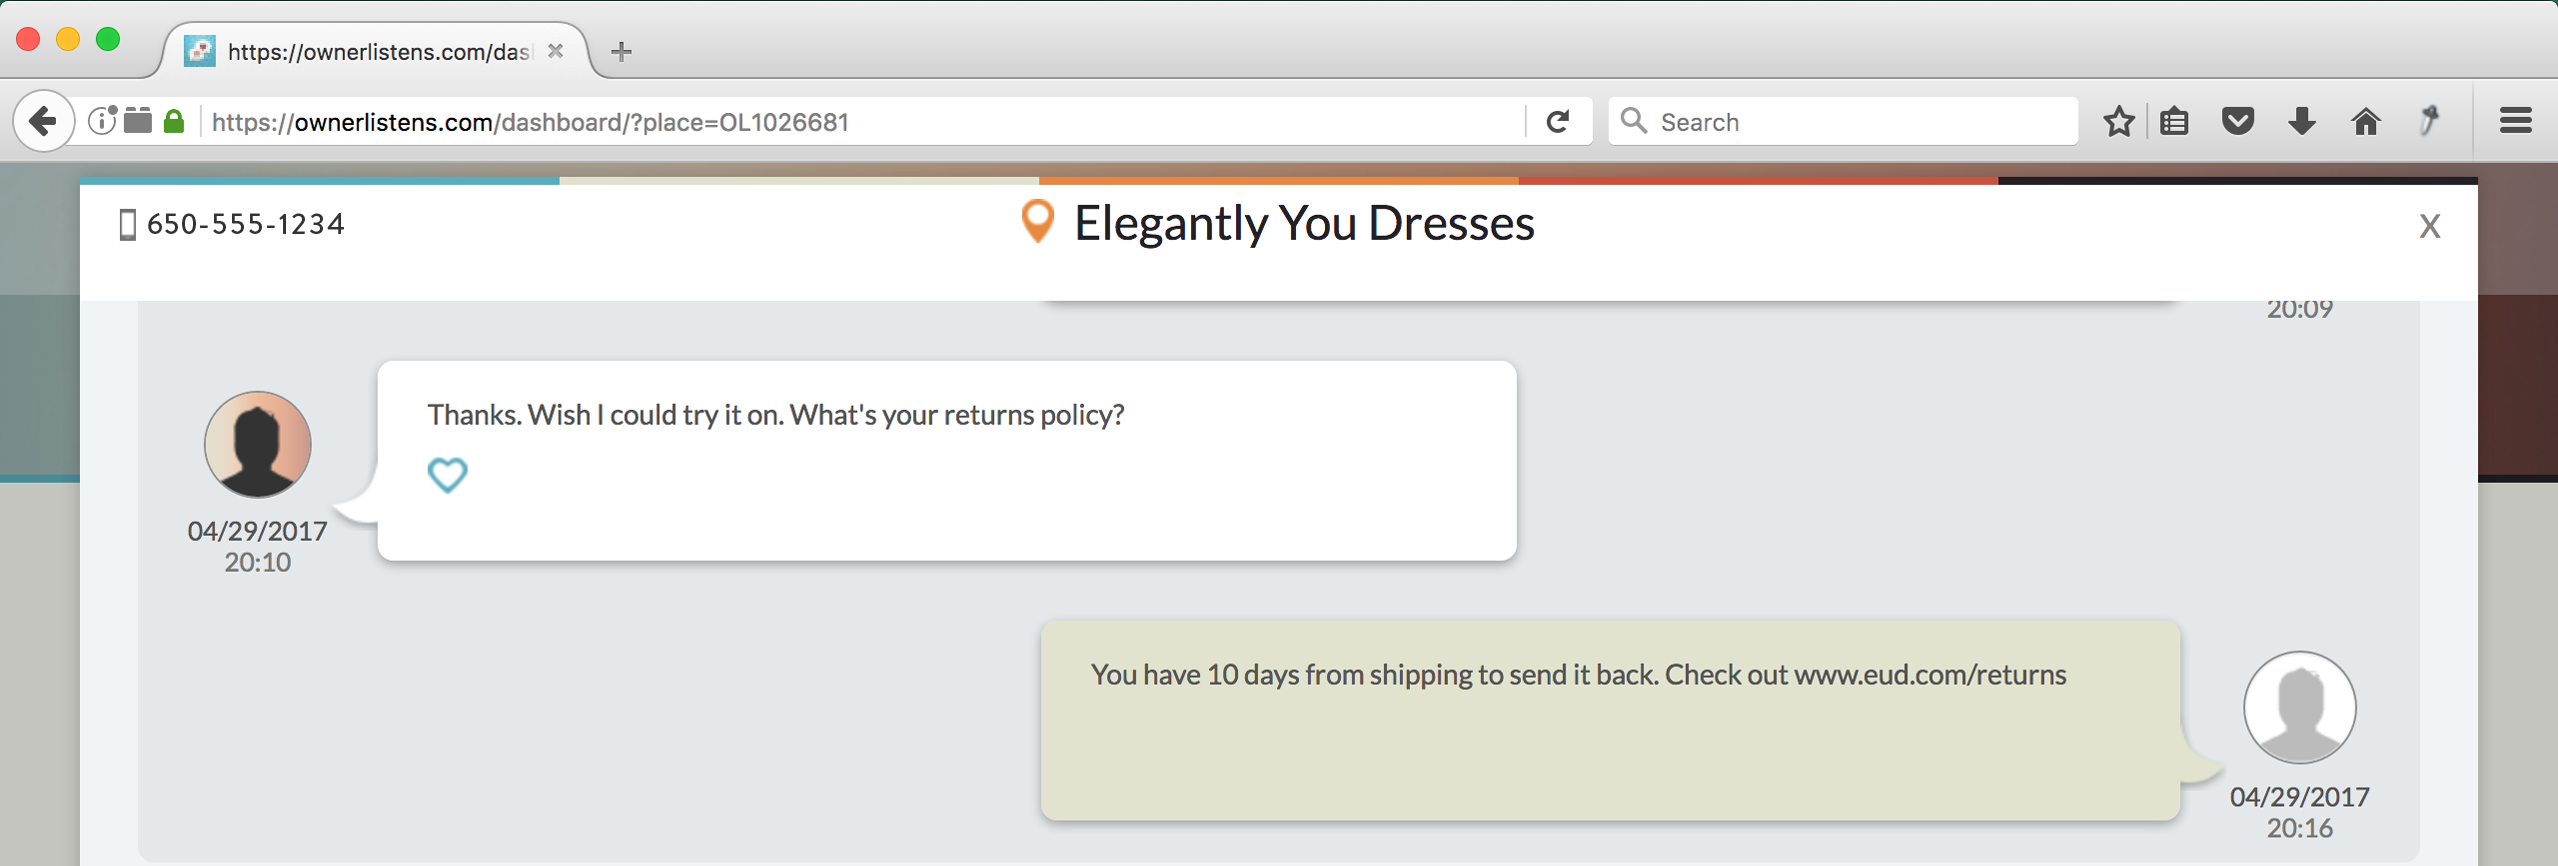 You have 10 days from the date of shipping